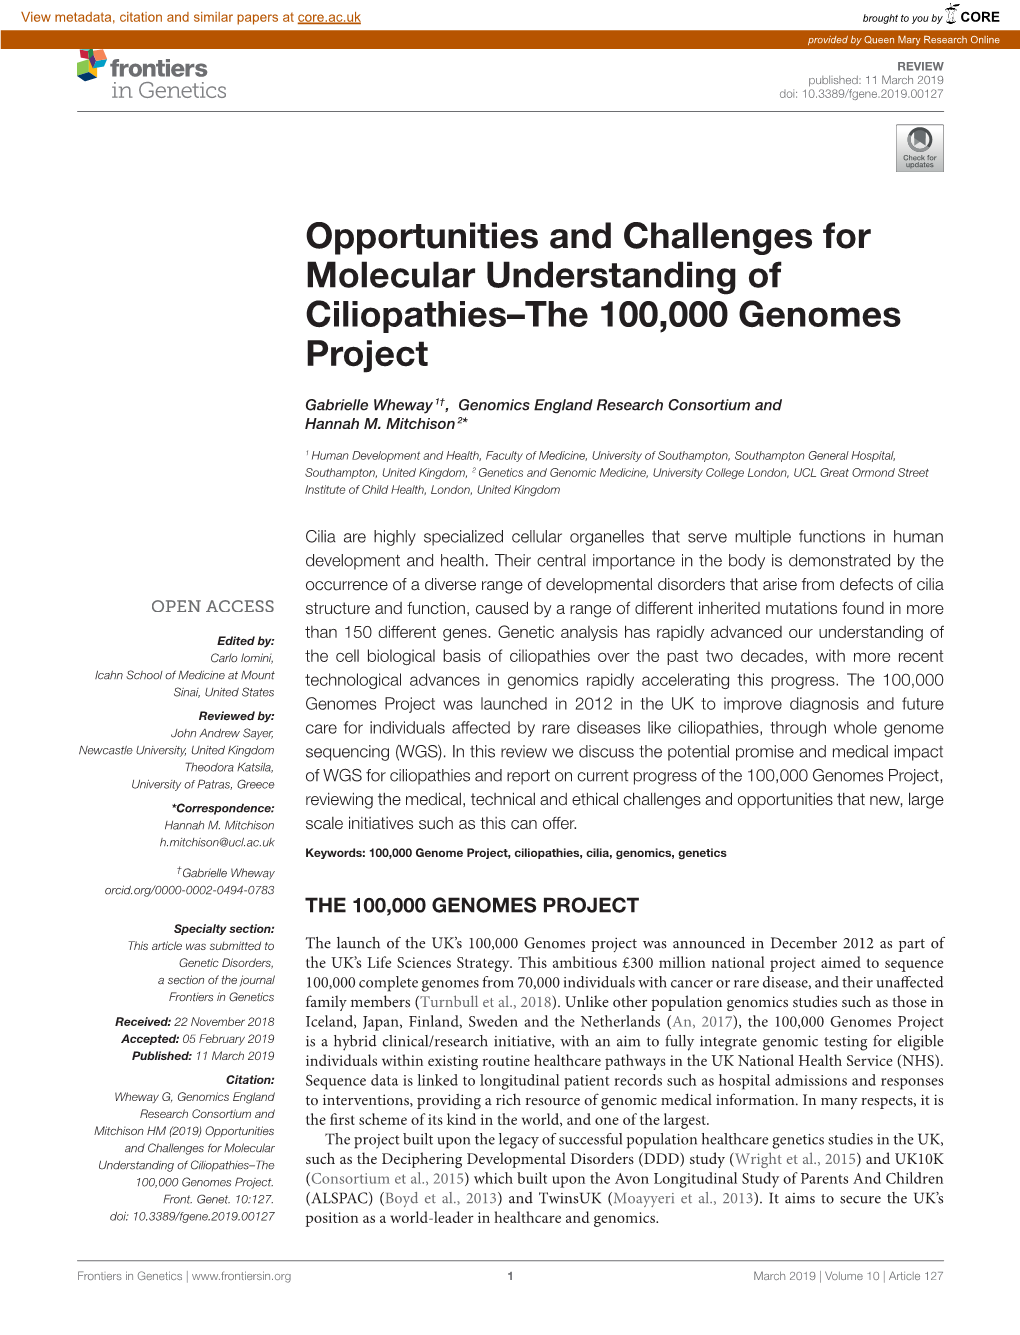 Opportunities and Challenges for Molecular Understanding of Ciliopathies–The 100,000 Genomes Project